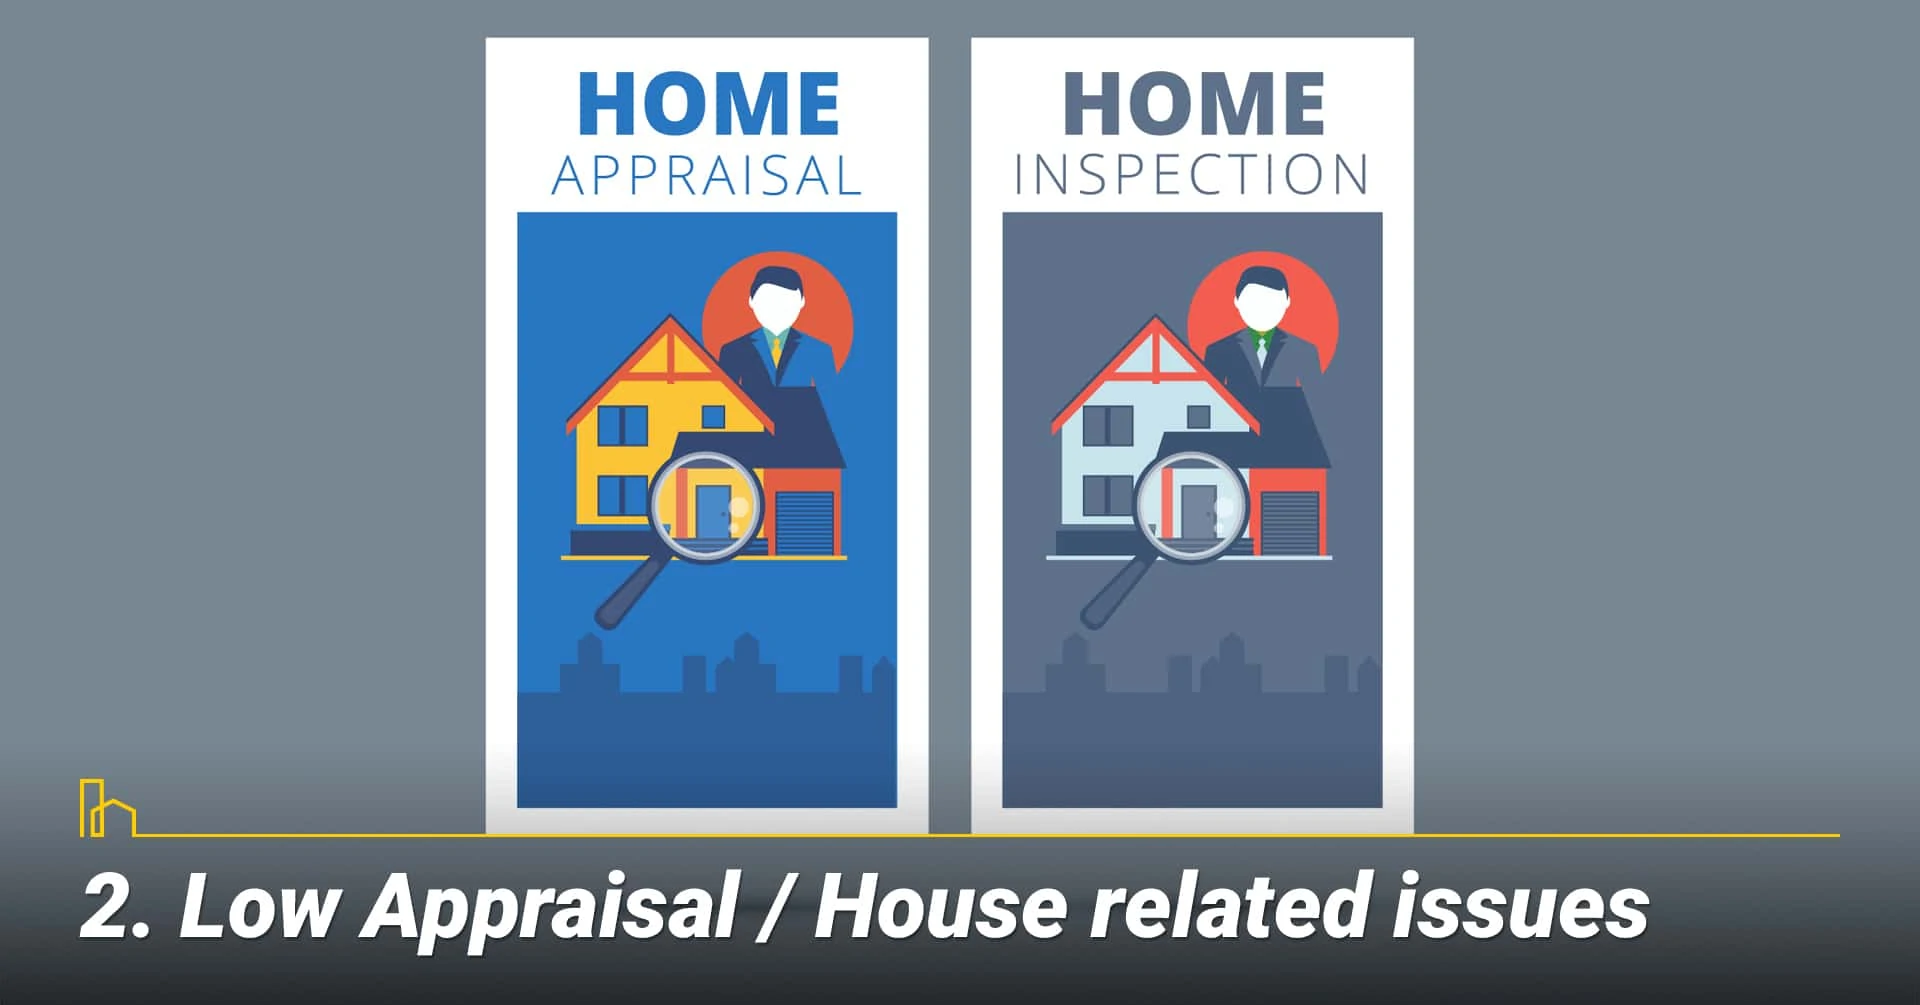 Low Appraisal / House related issues, inaccurate appraisal report